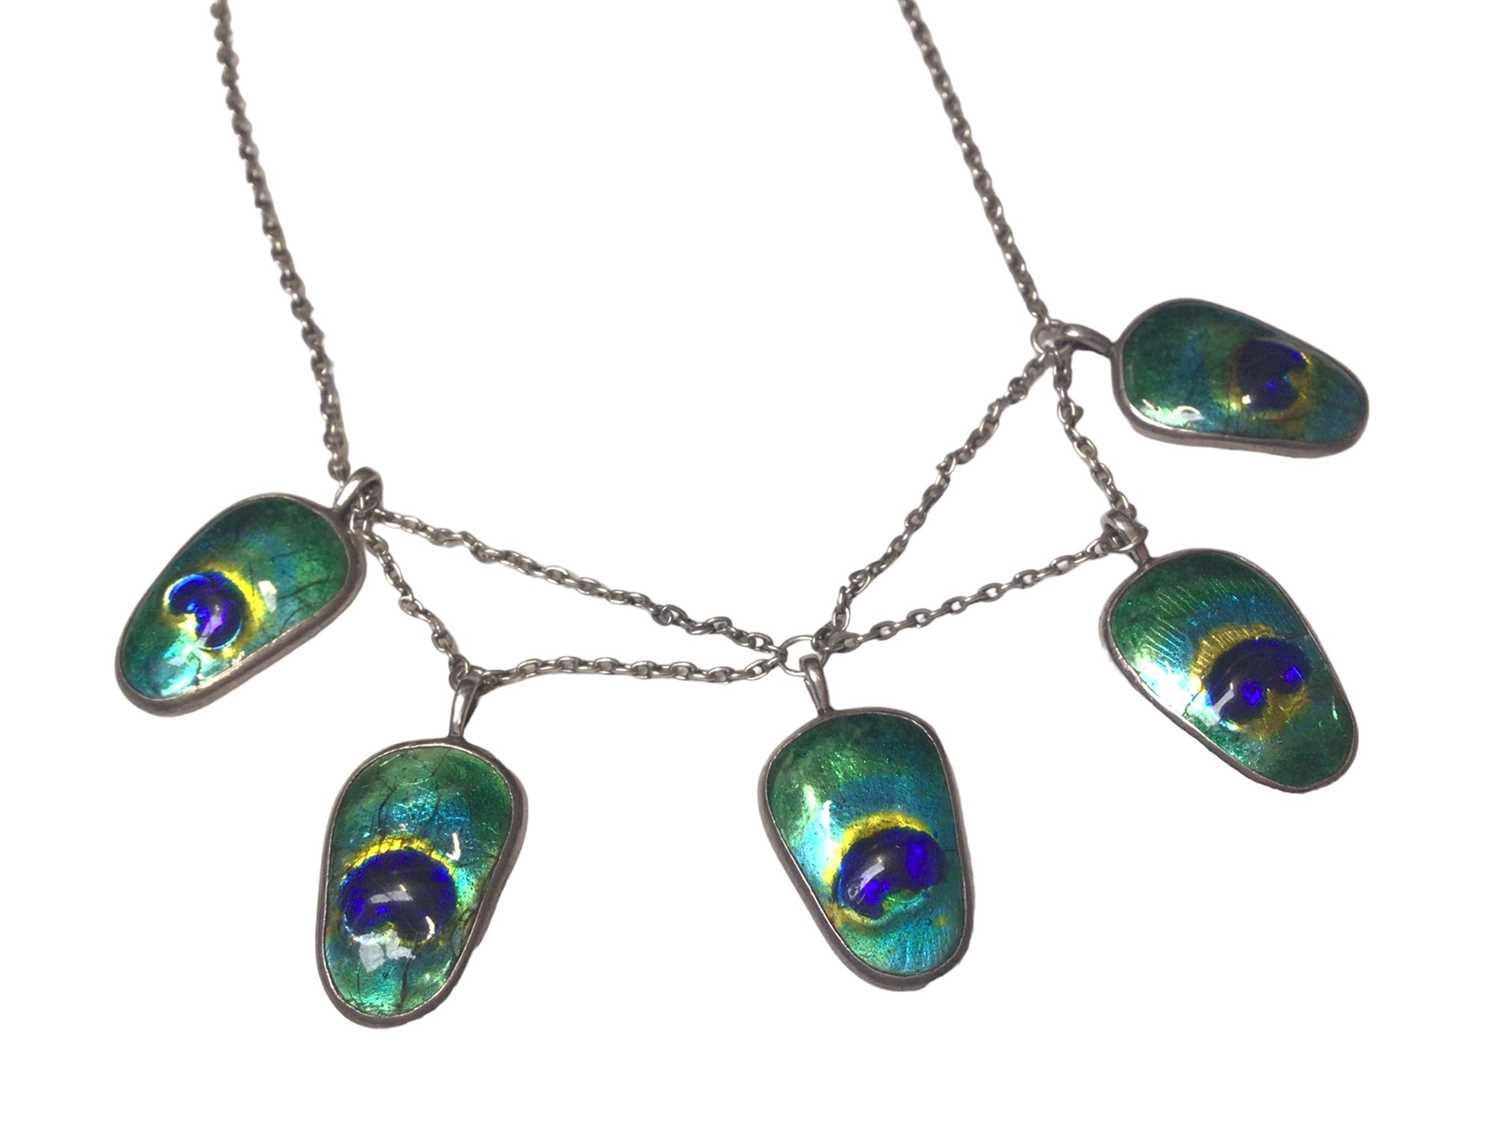 Art Nouveau style white metal and enamel necklace with five suspended pendants resembling peacock fe - Image 2 of 4